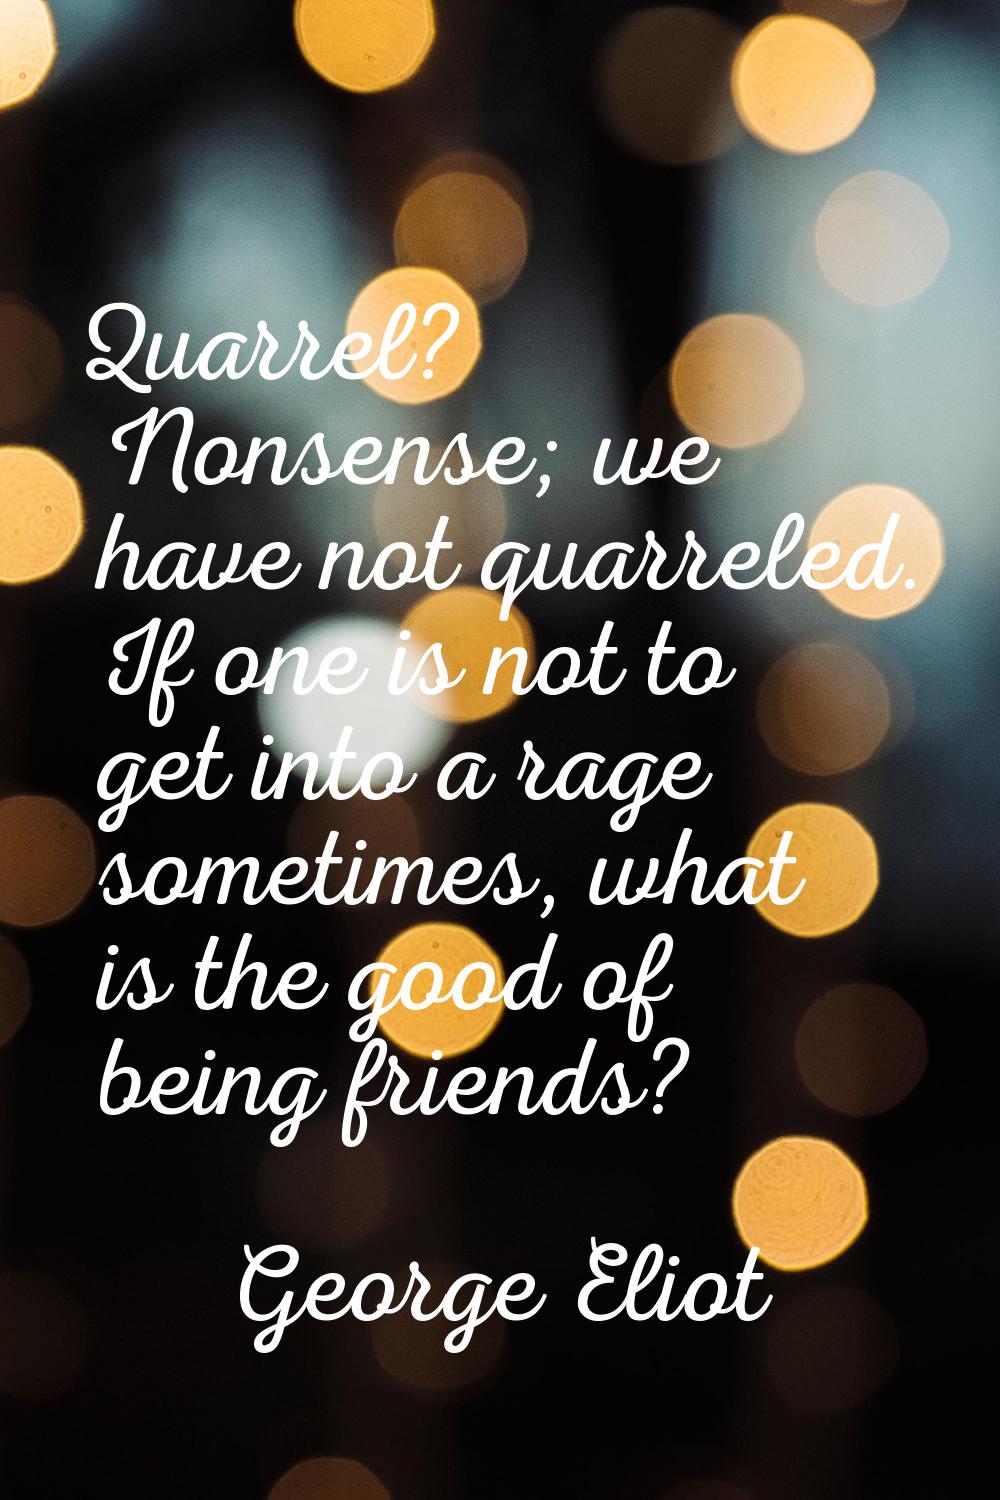 Quarrel? Nonsense; we have not quarreled. If one is not to get into a rage sometimes, what is the g